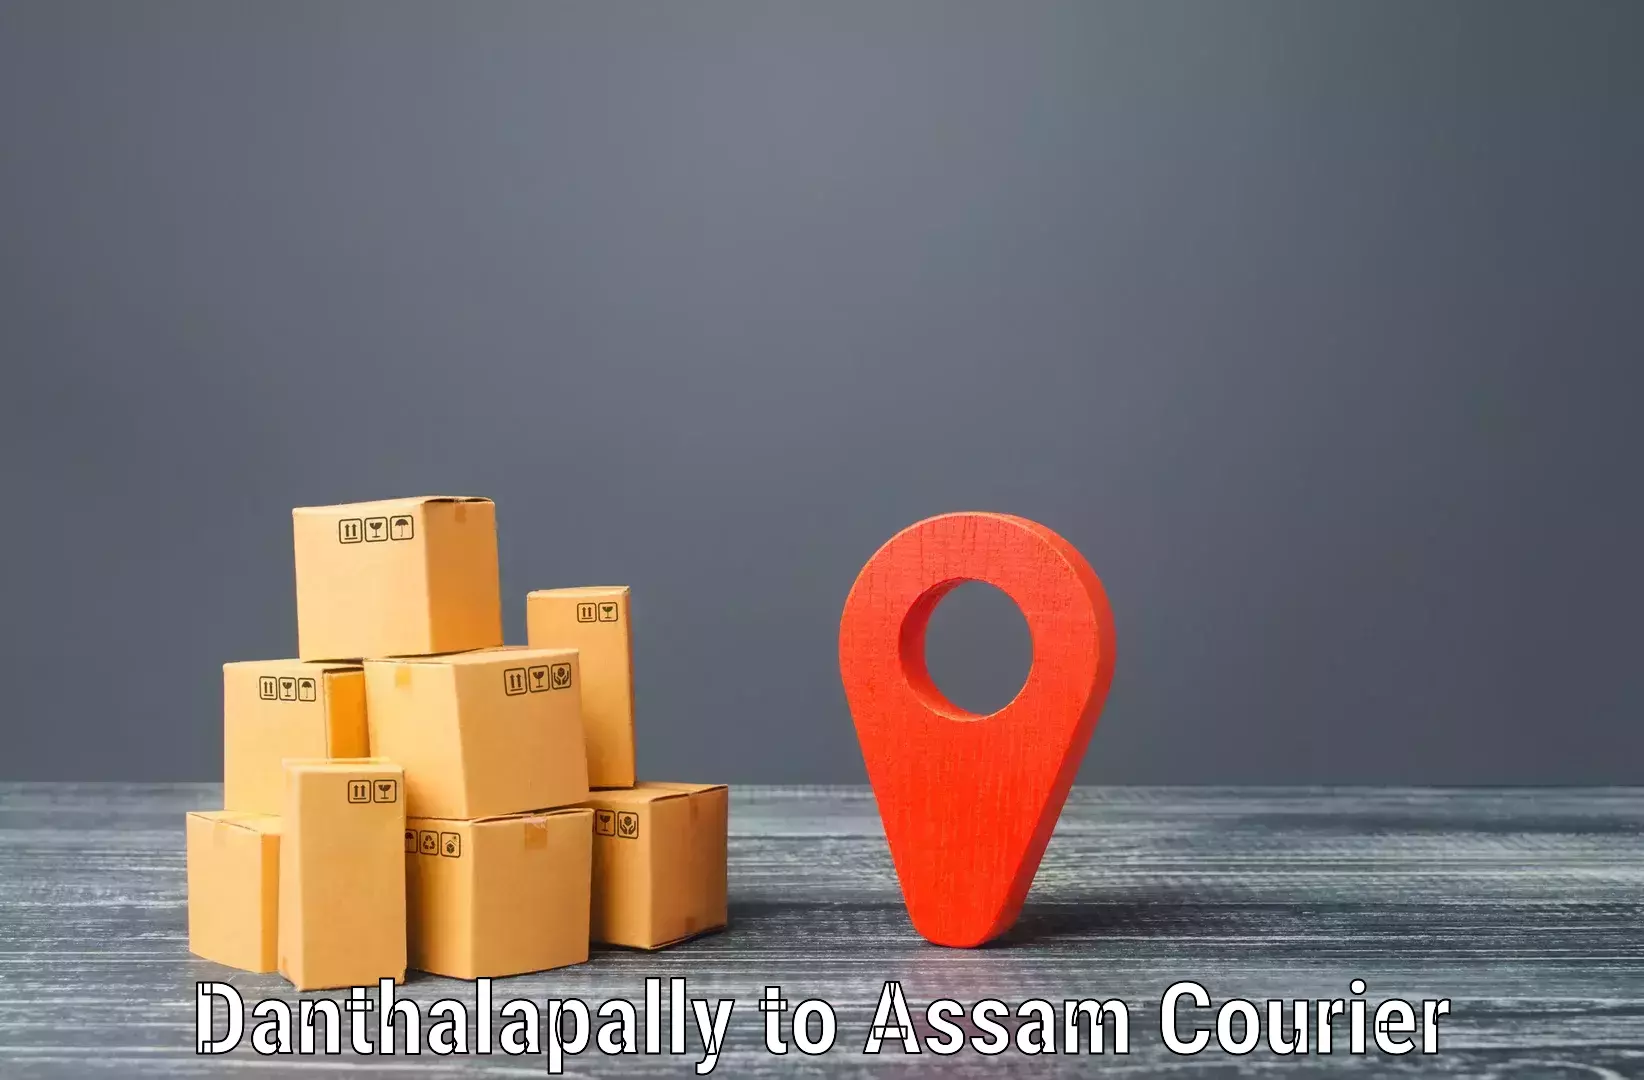 Pharmaceutical courier Danthalapally to Sonitpur